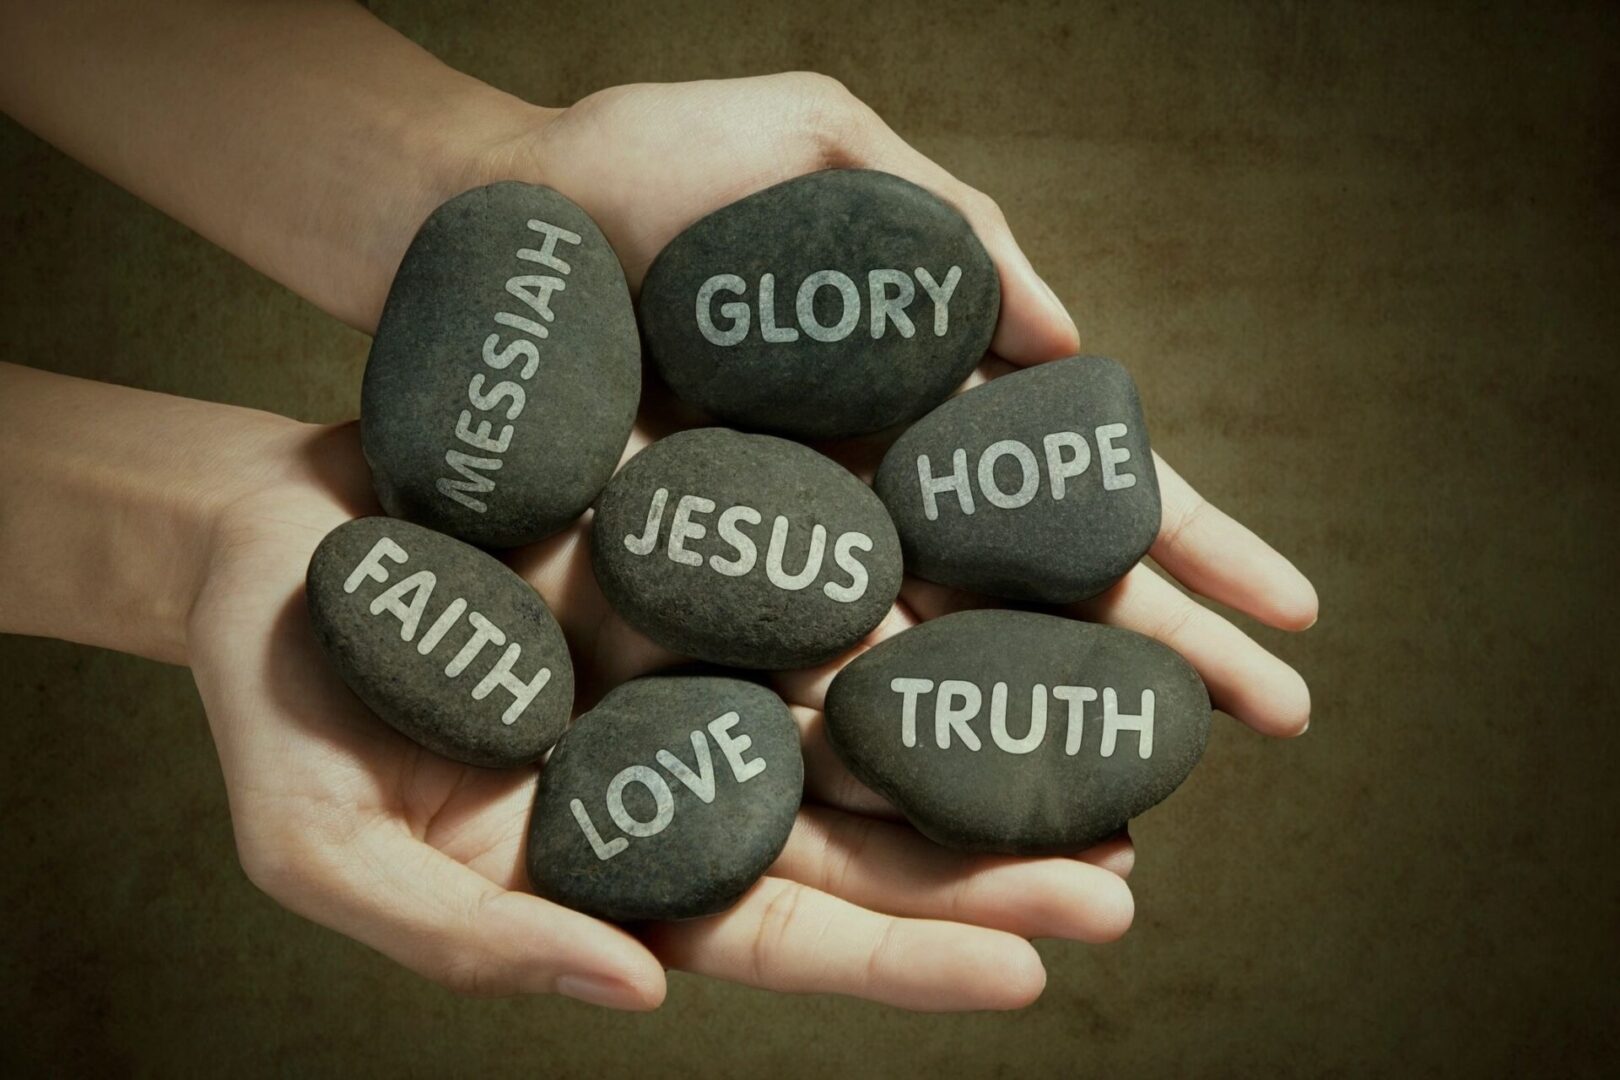 Hands holding up smooth rocks with the words “Jesus,” “faith,” “Messiah,” and other related terms